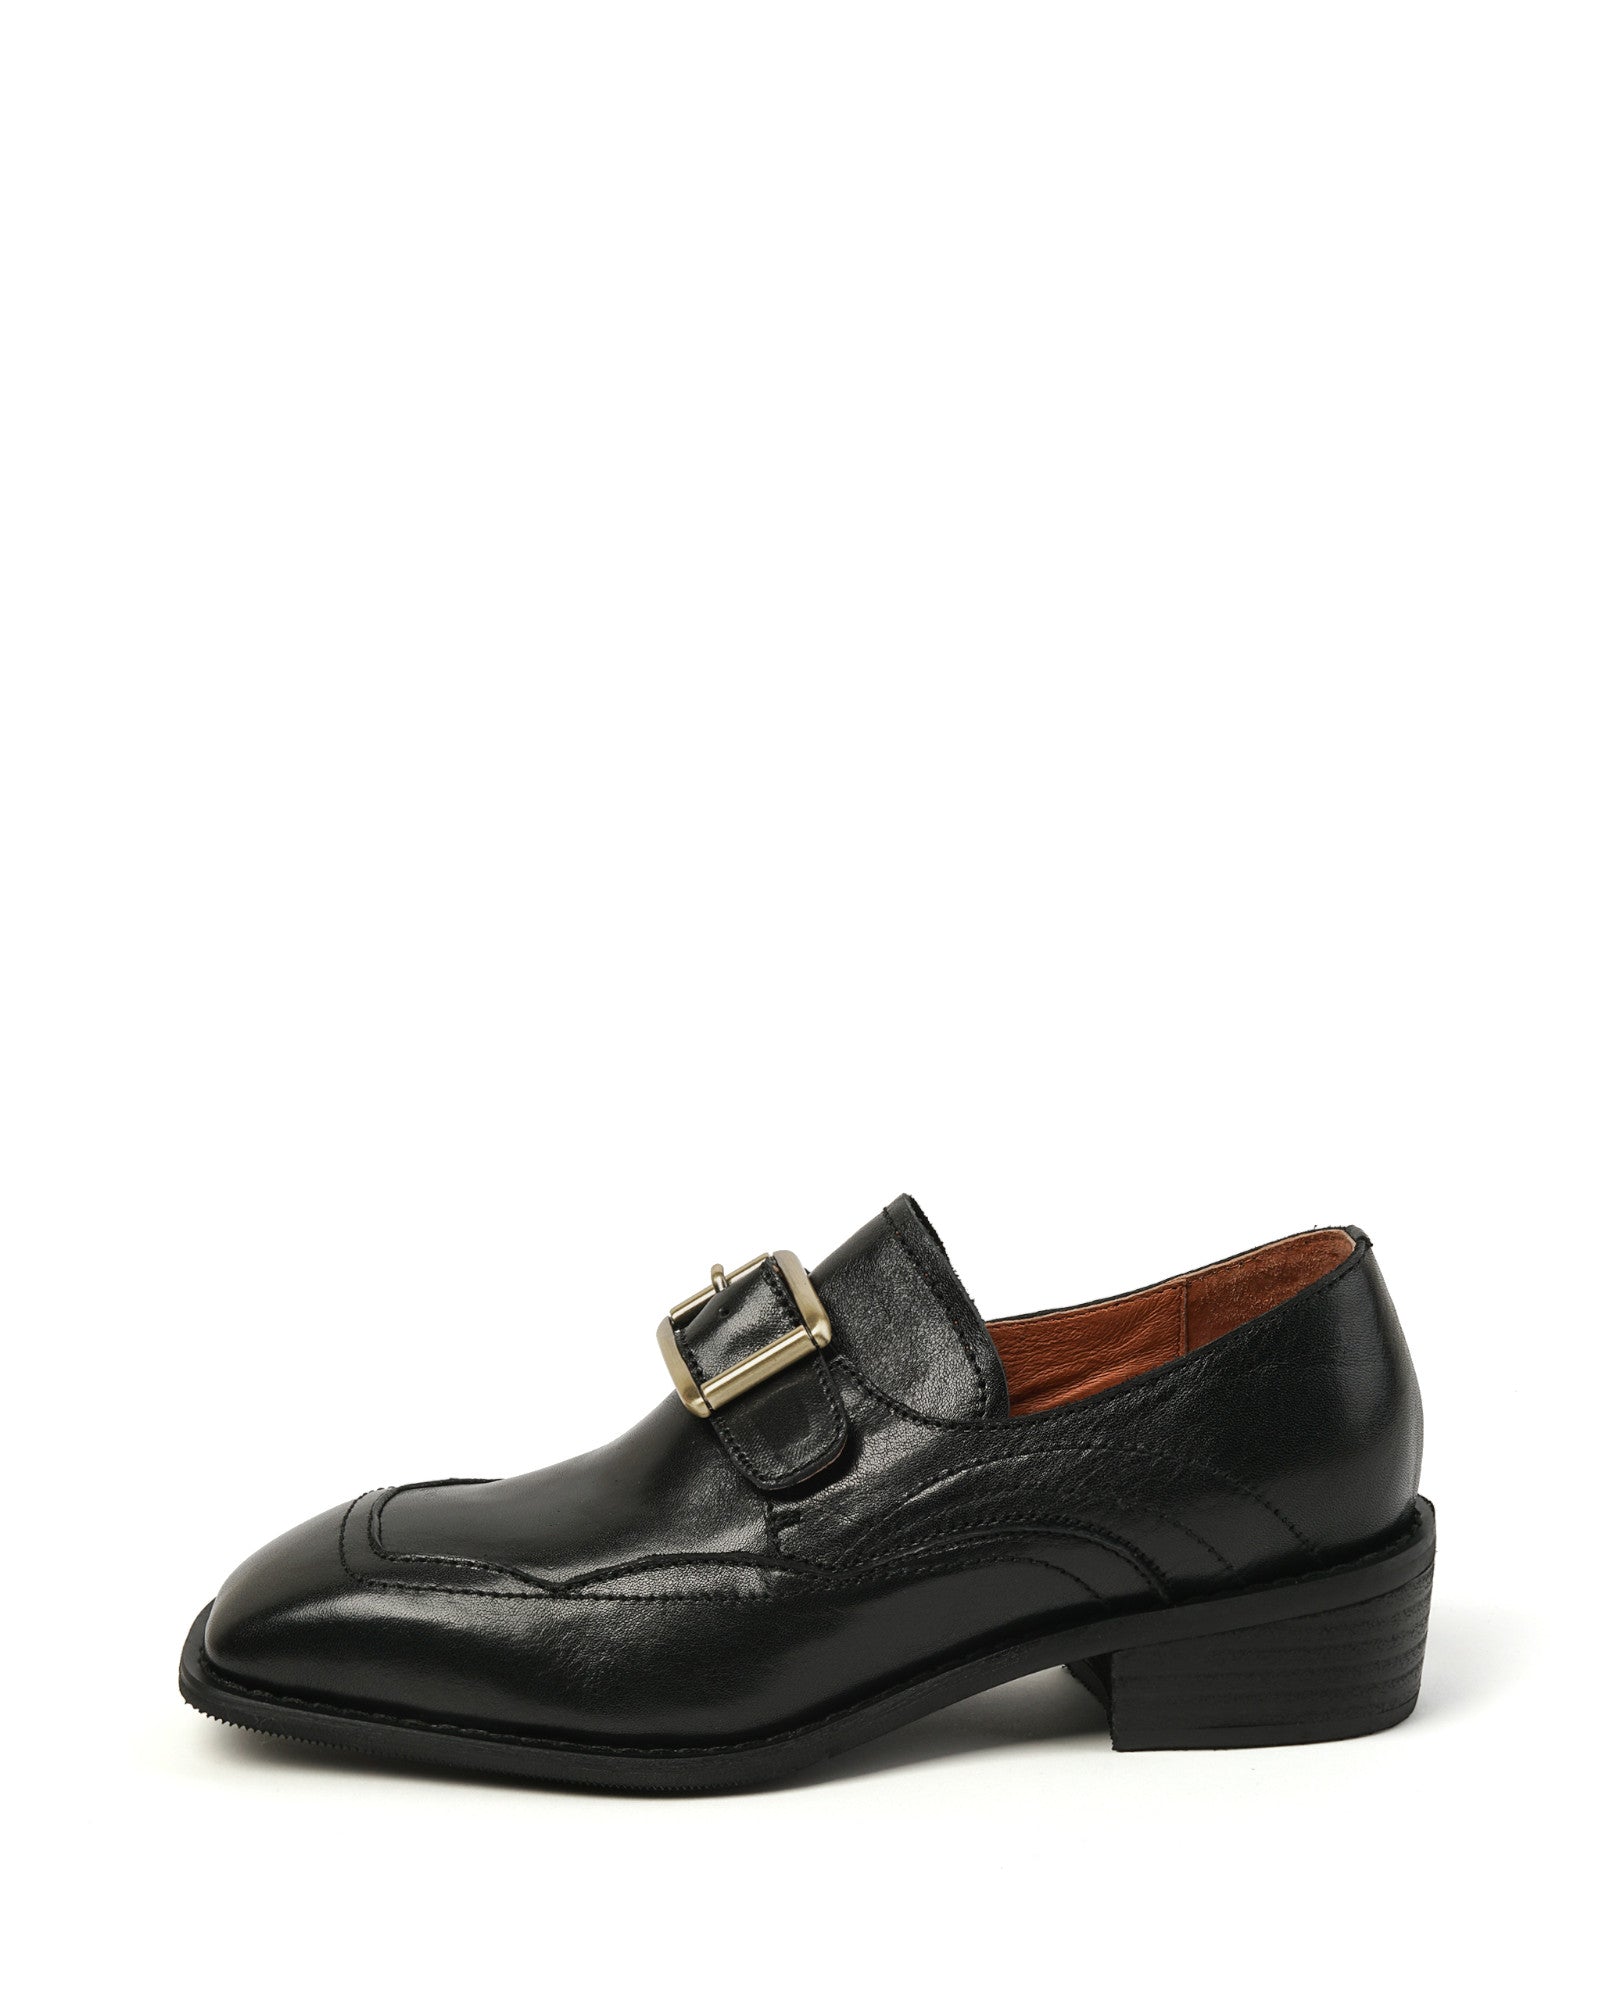 190-square-toe-black-leather-loafers-1